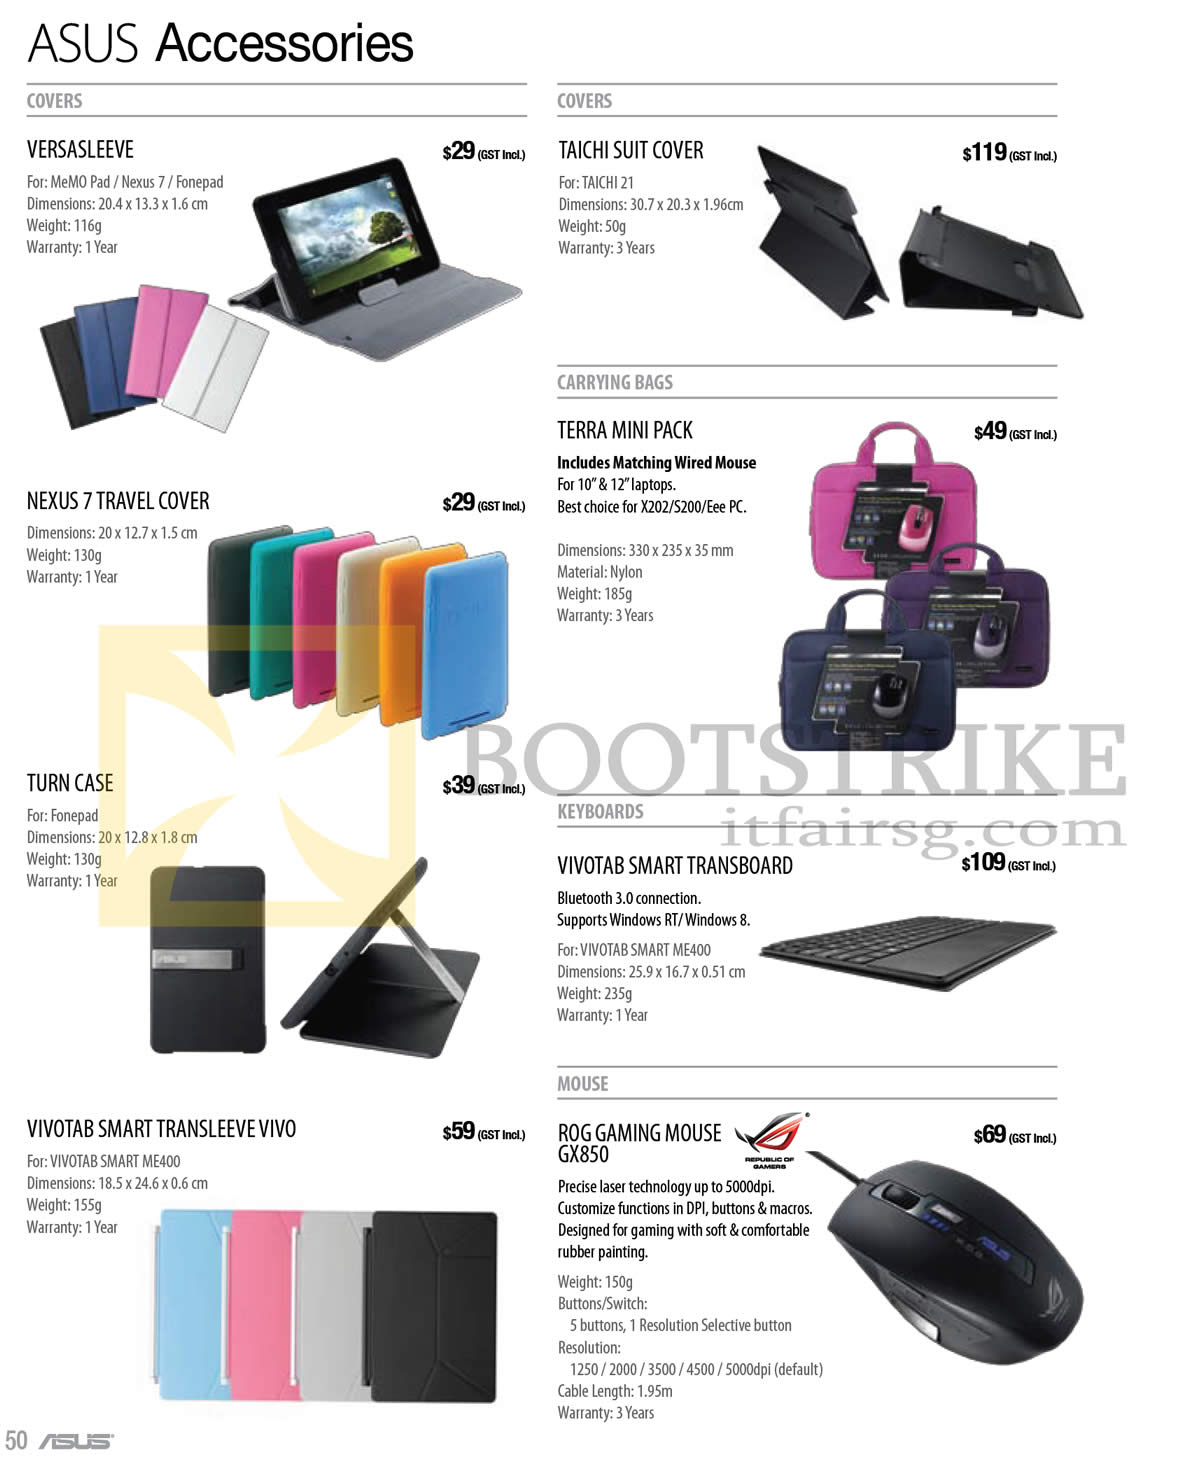 PC SHOW 2013 price list image brochure of ASUS Notebooks Tablets Accessories, Case, Keyboards, Mouse, Bags, Covers